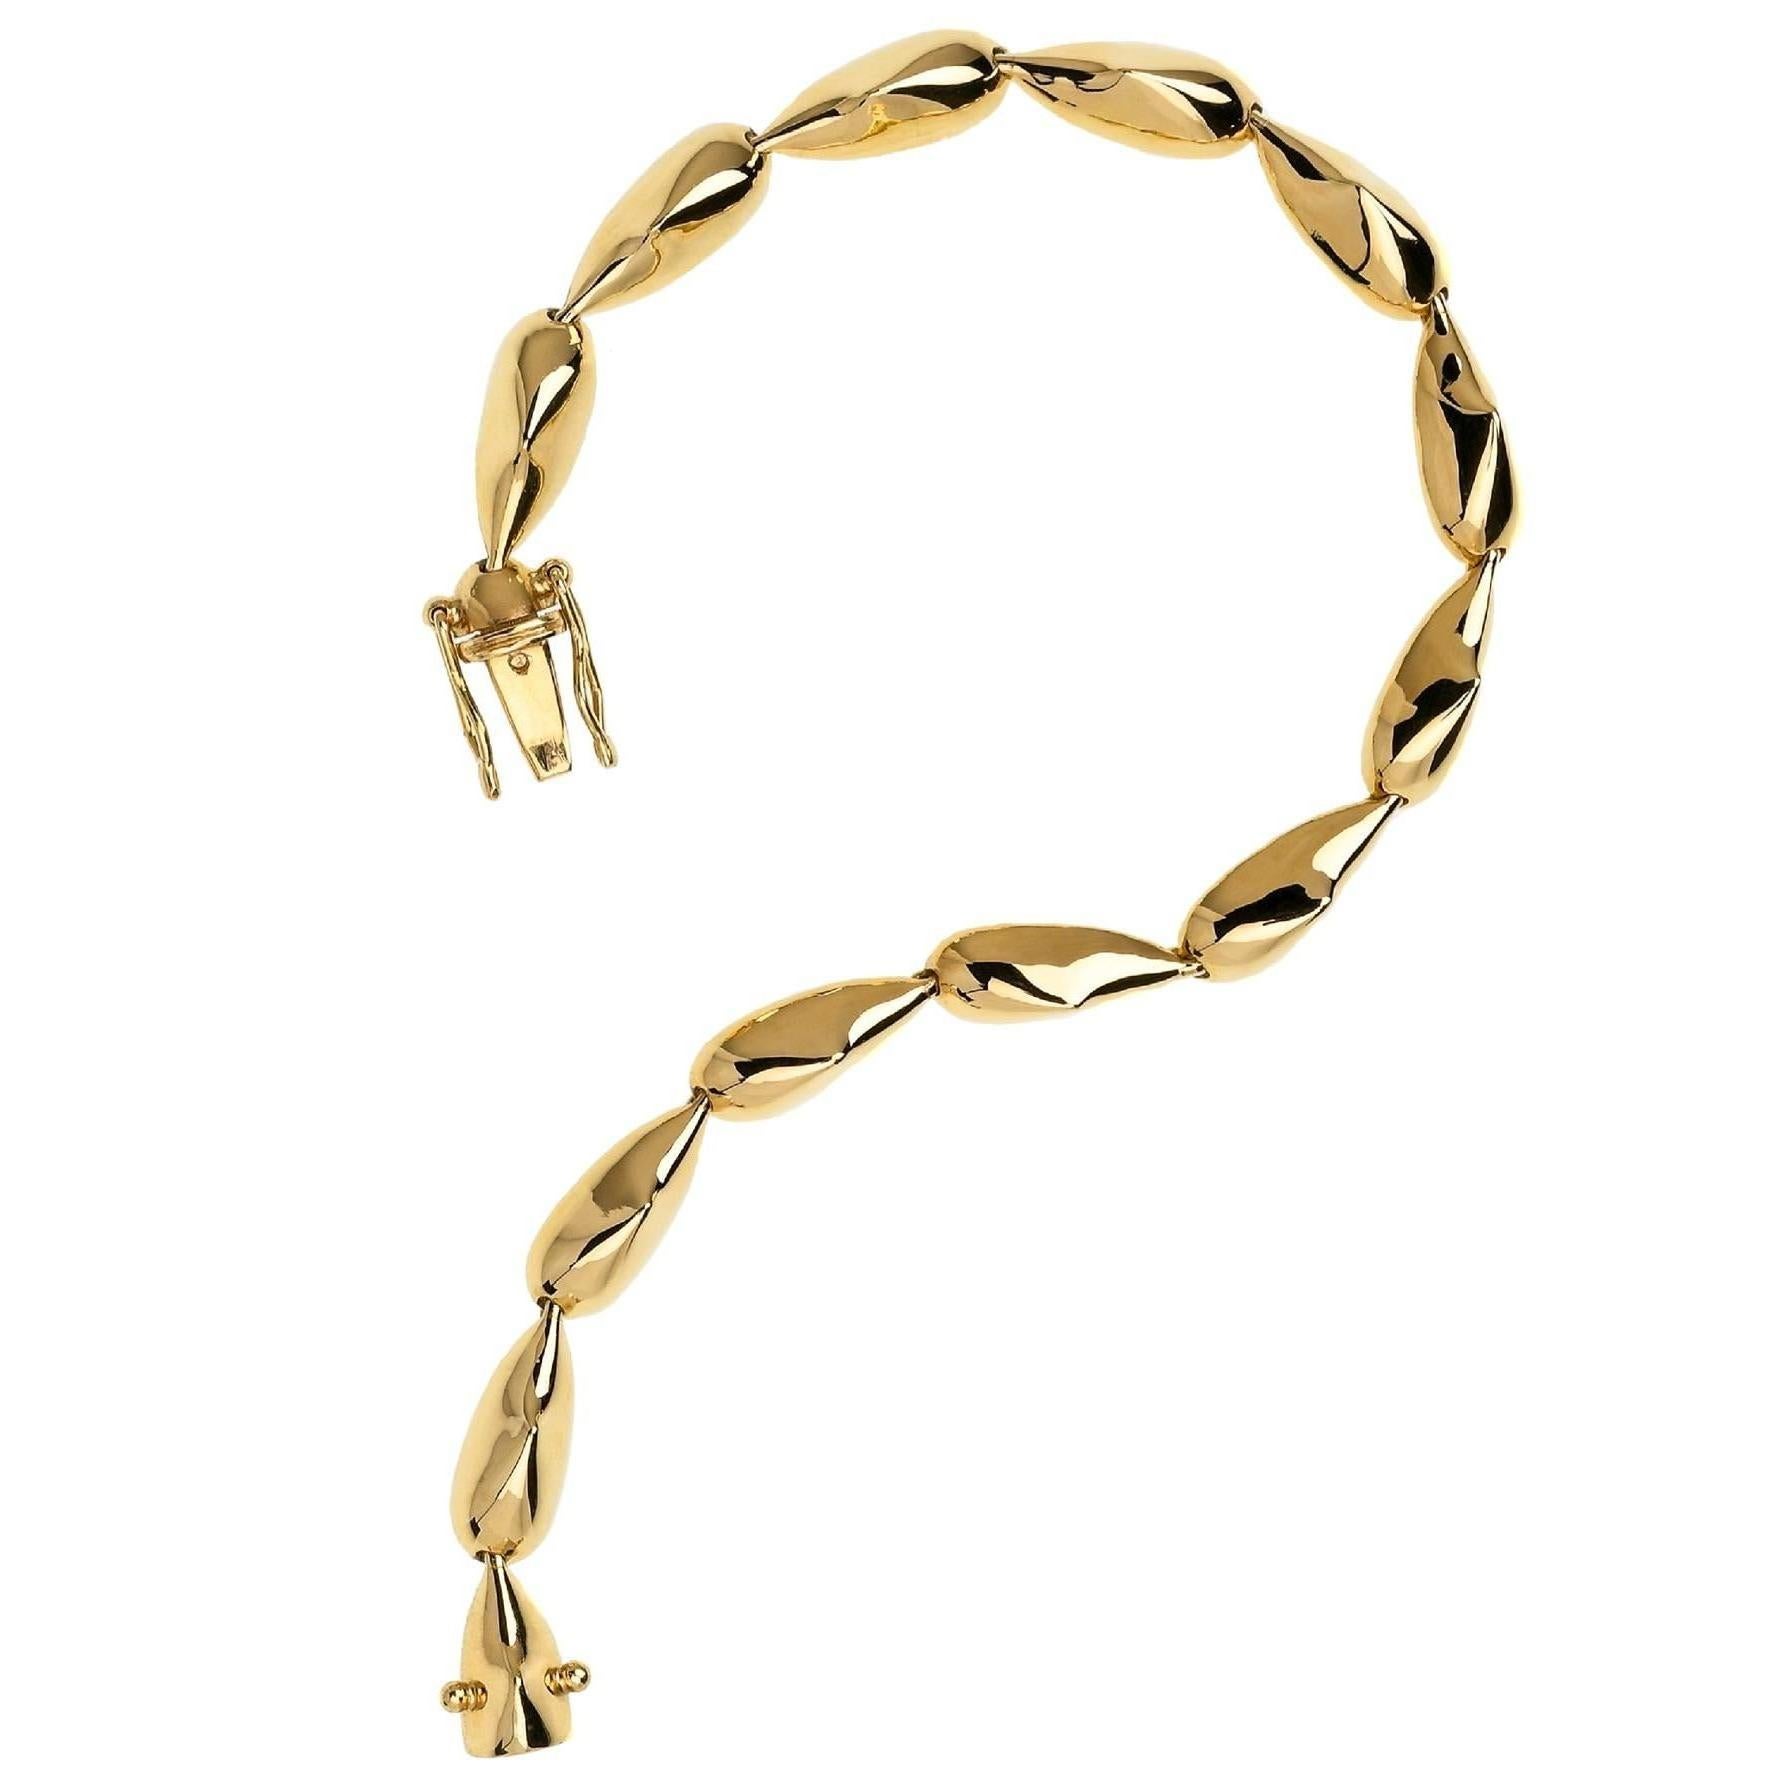 Maria Kotsoni Contemporary 18K Yellow Gold, Articulated Spike Link Bracelet For Sale 1